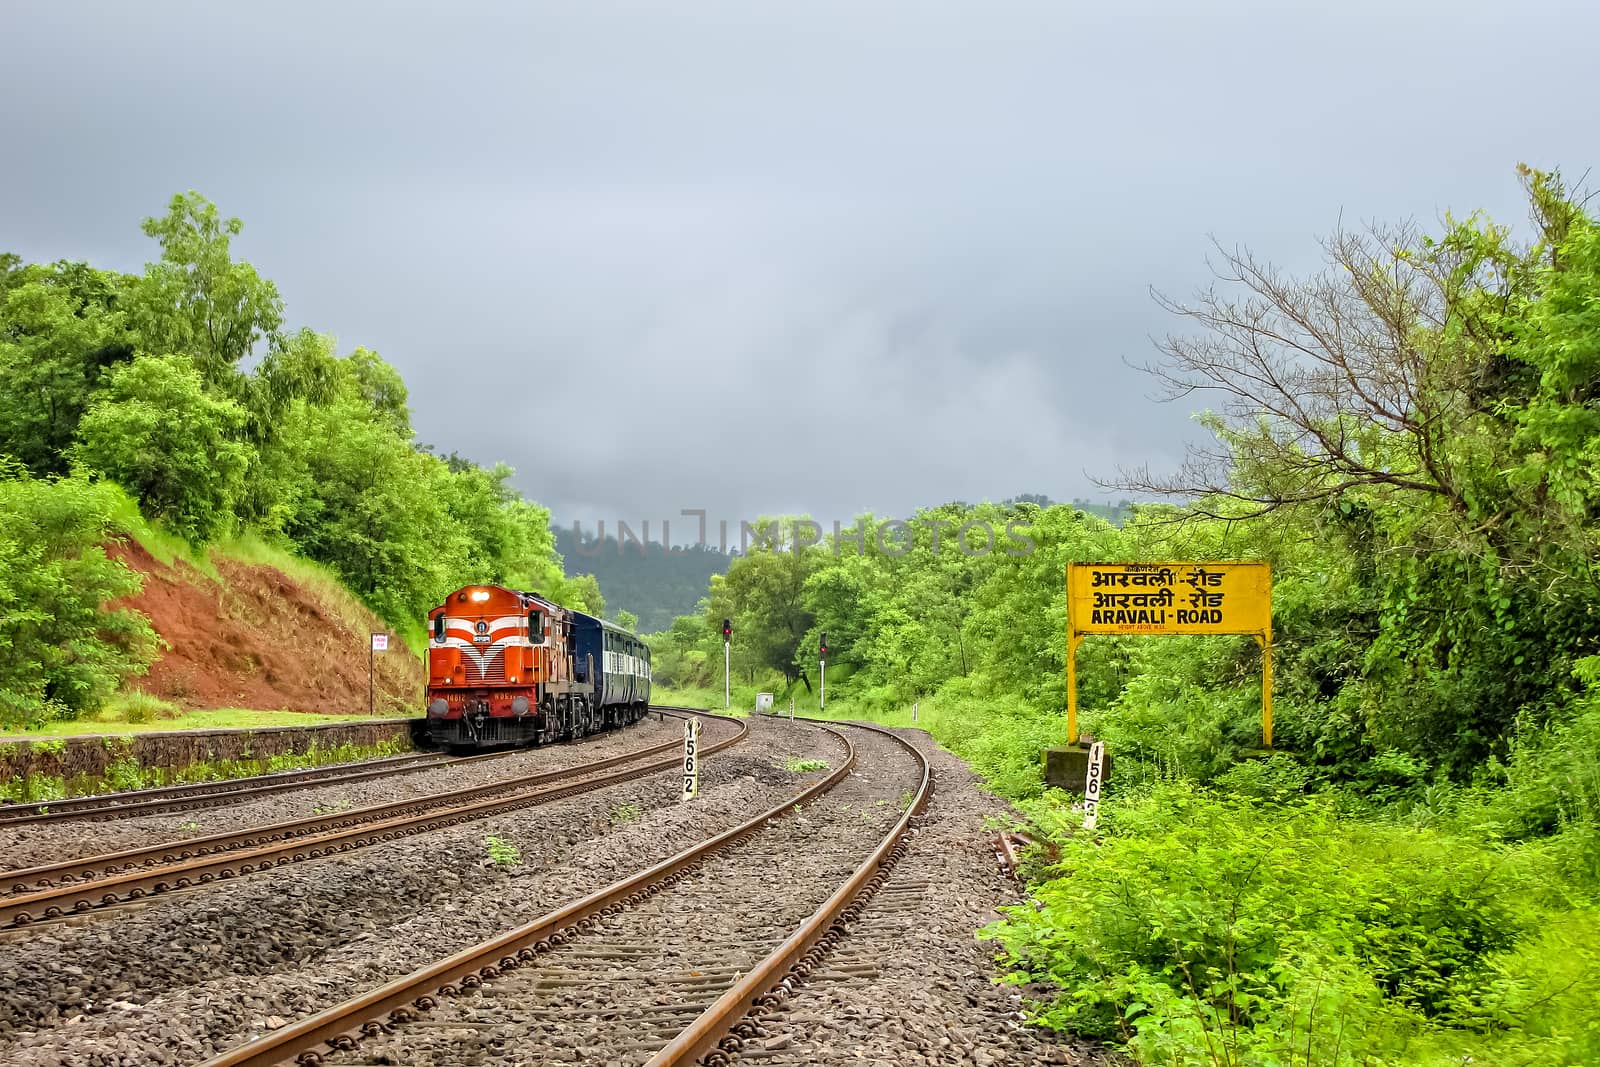 Indian Railway's passenger carrying train entering a beautiful, scenic station, by lalam